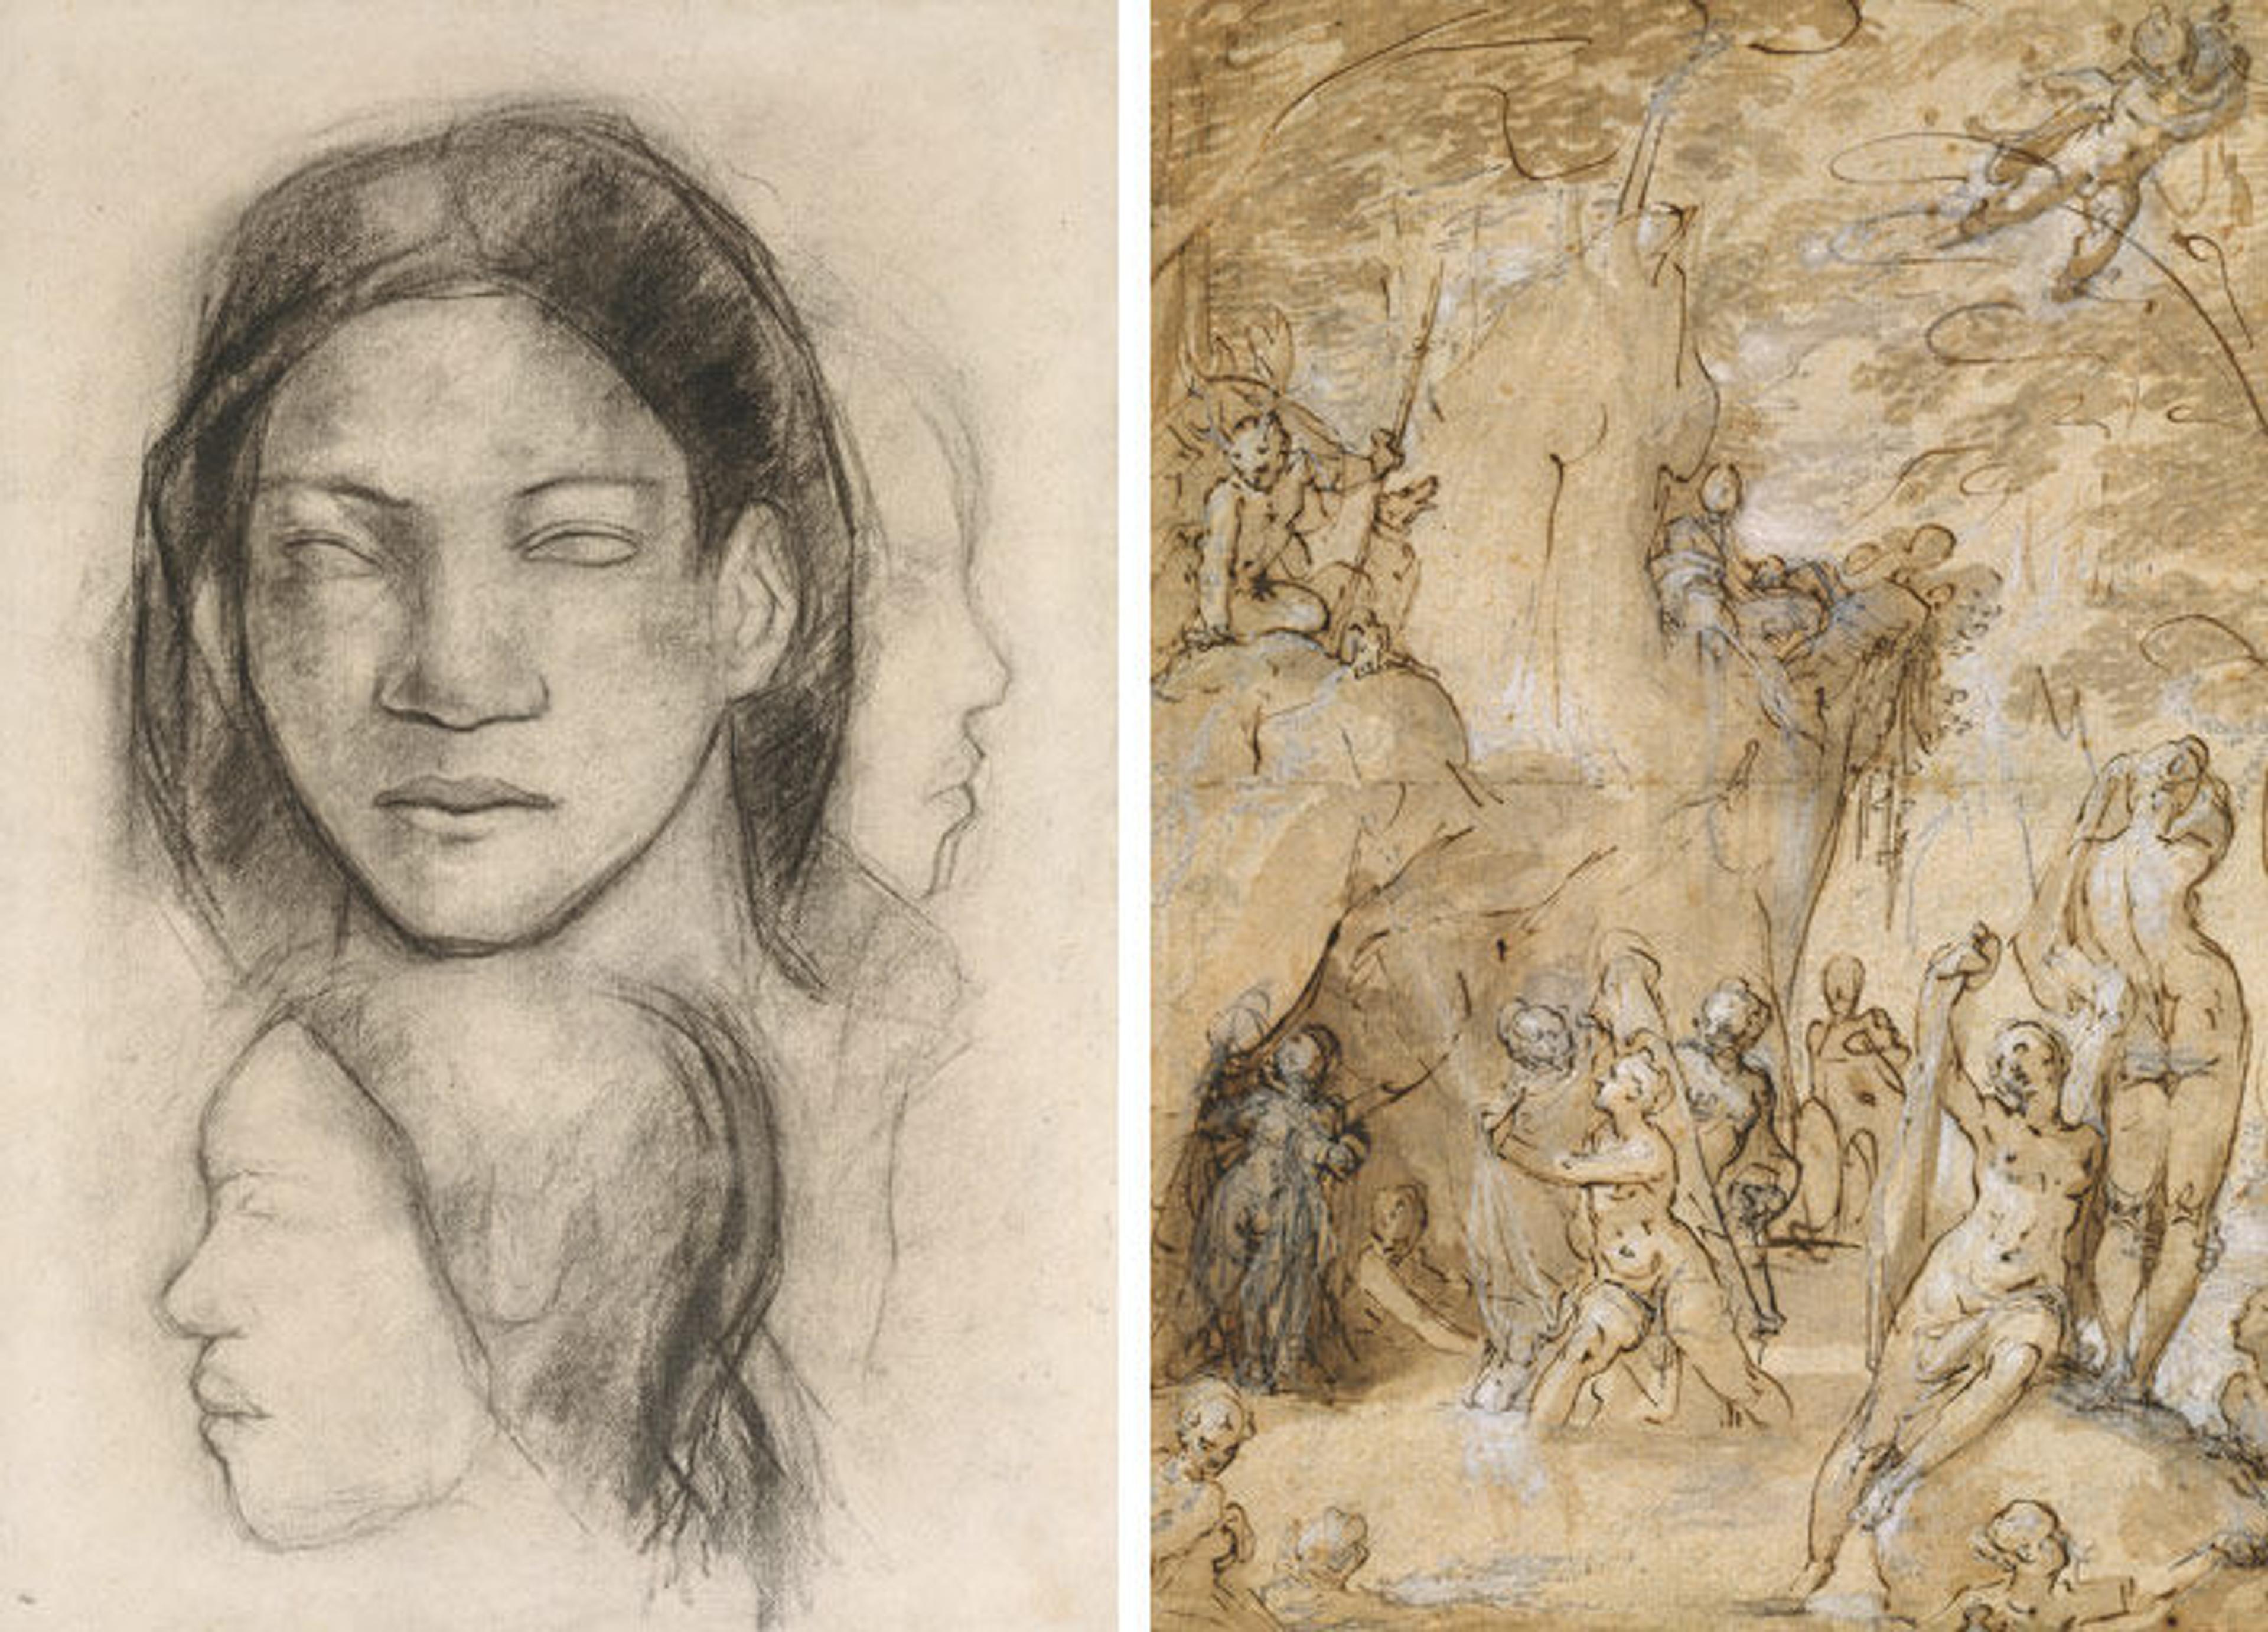 At left, a Gauguin drawing of three Maori faces; at right, a drawing by Bartholomeus Spranger depicting a scene involving the ancient Roman figures Diana and Actaeon